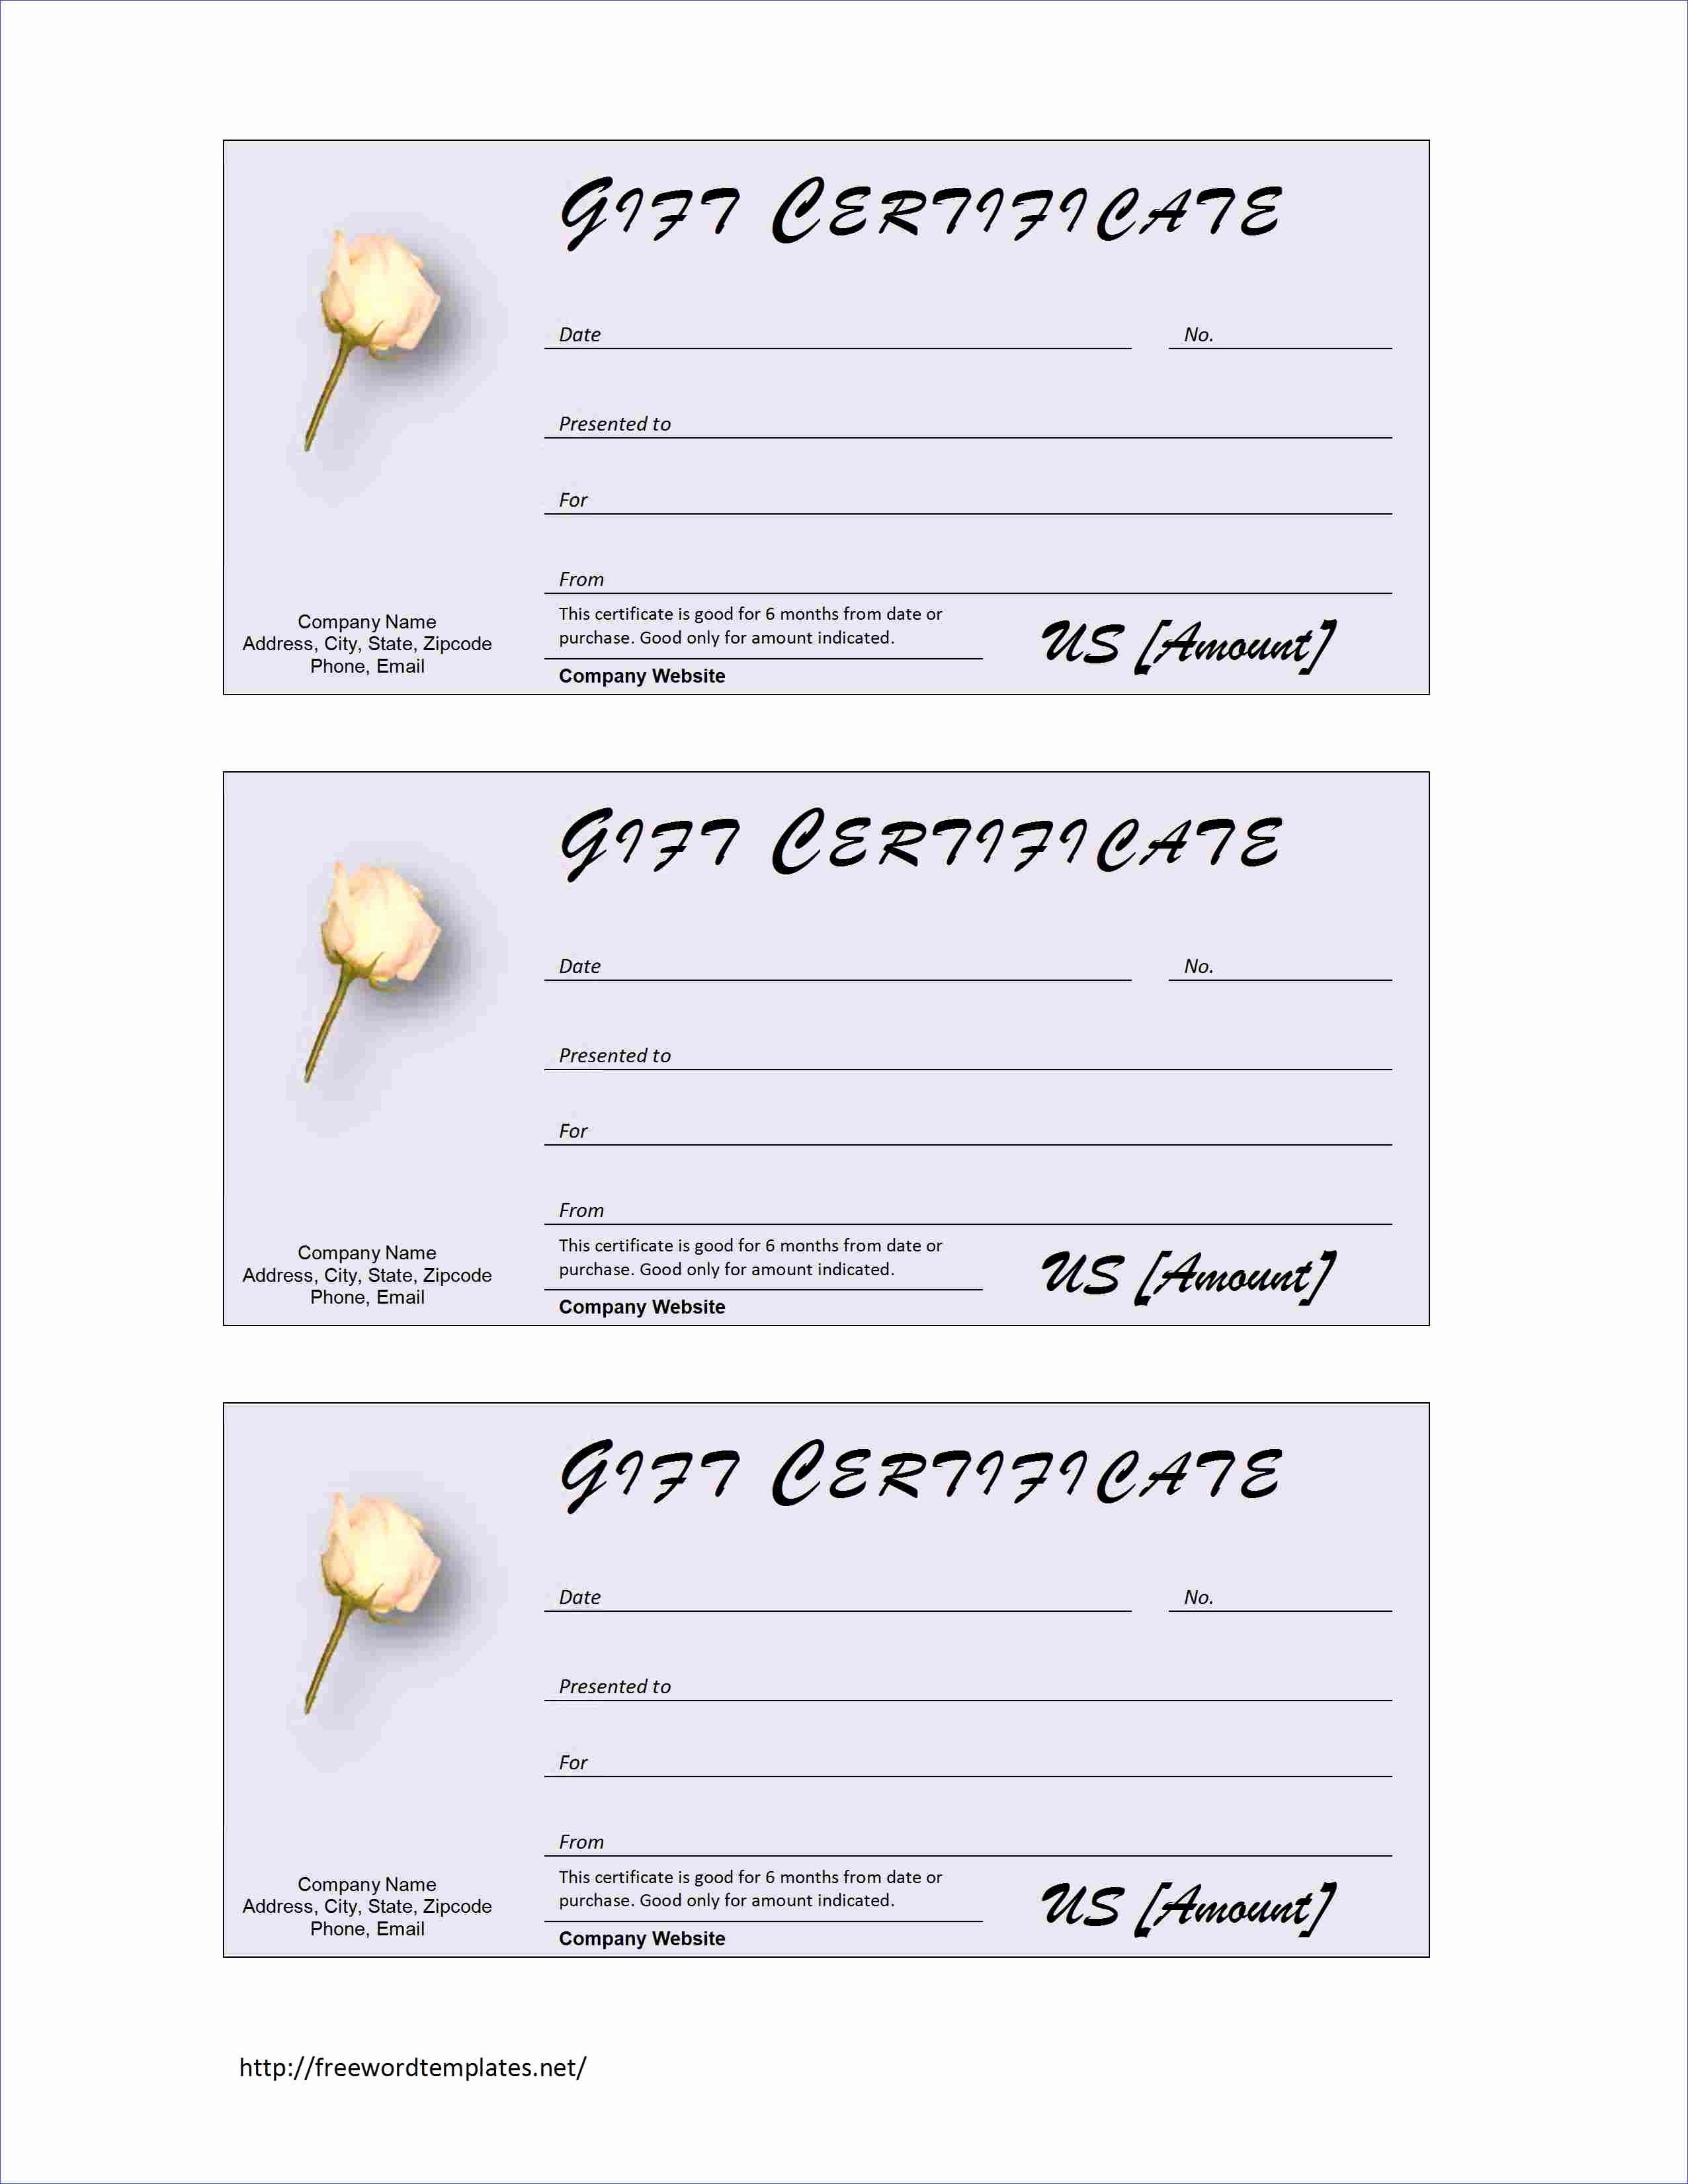 Make Up Gift Certificate Template Awesome How to Make A Gift Certificate In Word